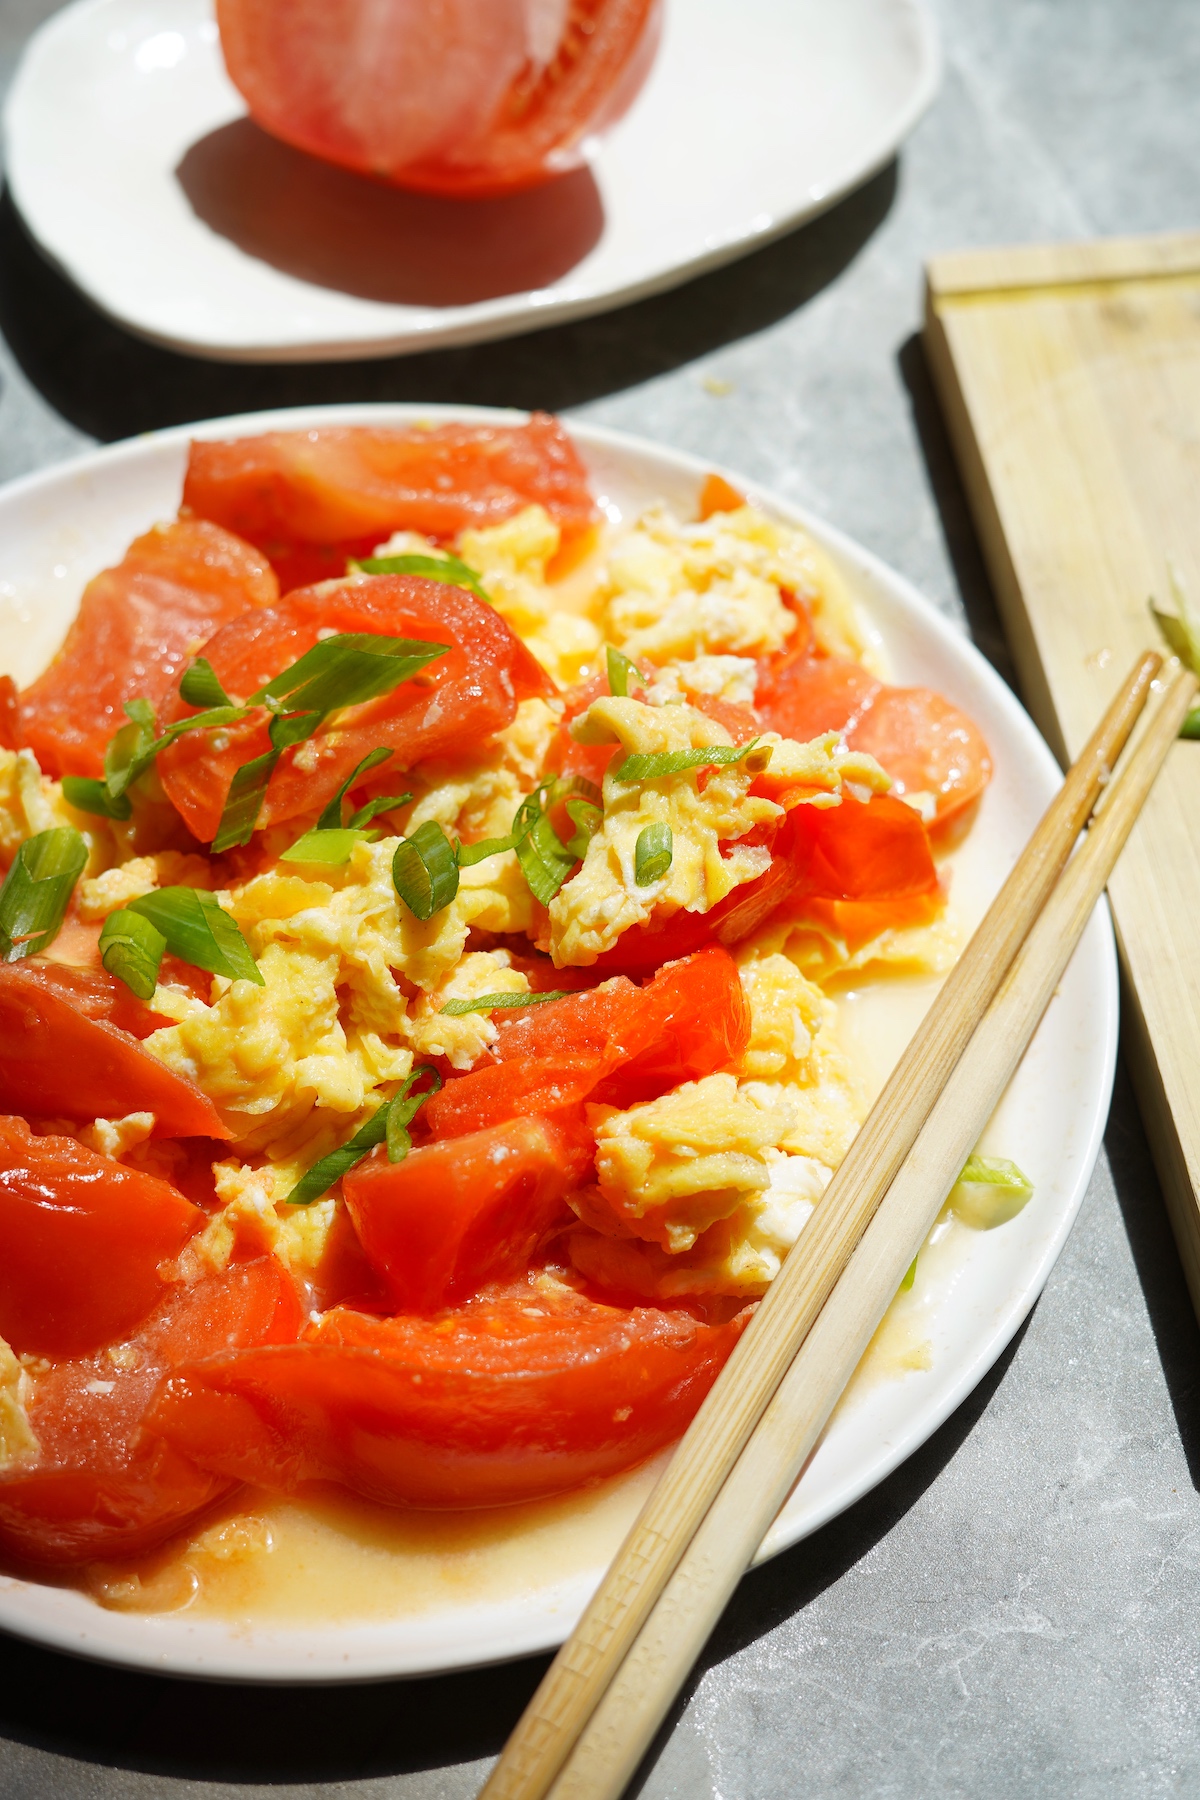 Tomato egg stir-fry on a dish with chopsticks on the side.